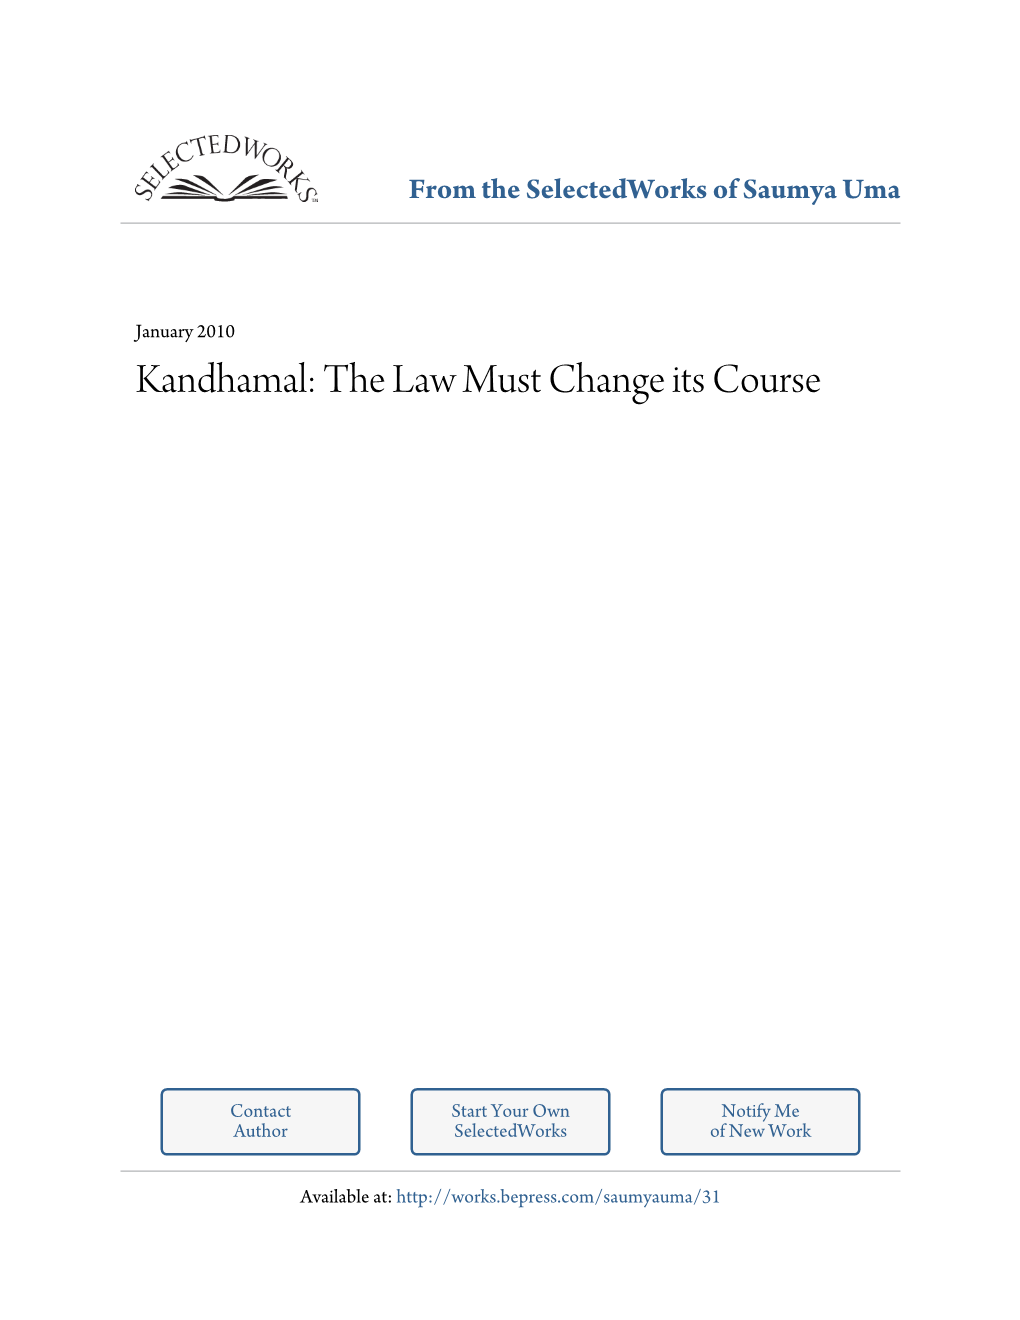 Kandhamal: the Law Must Change Its Course